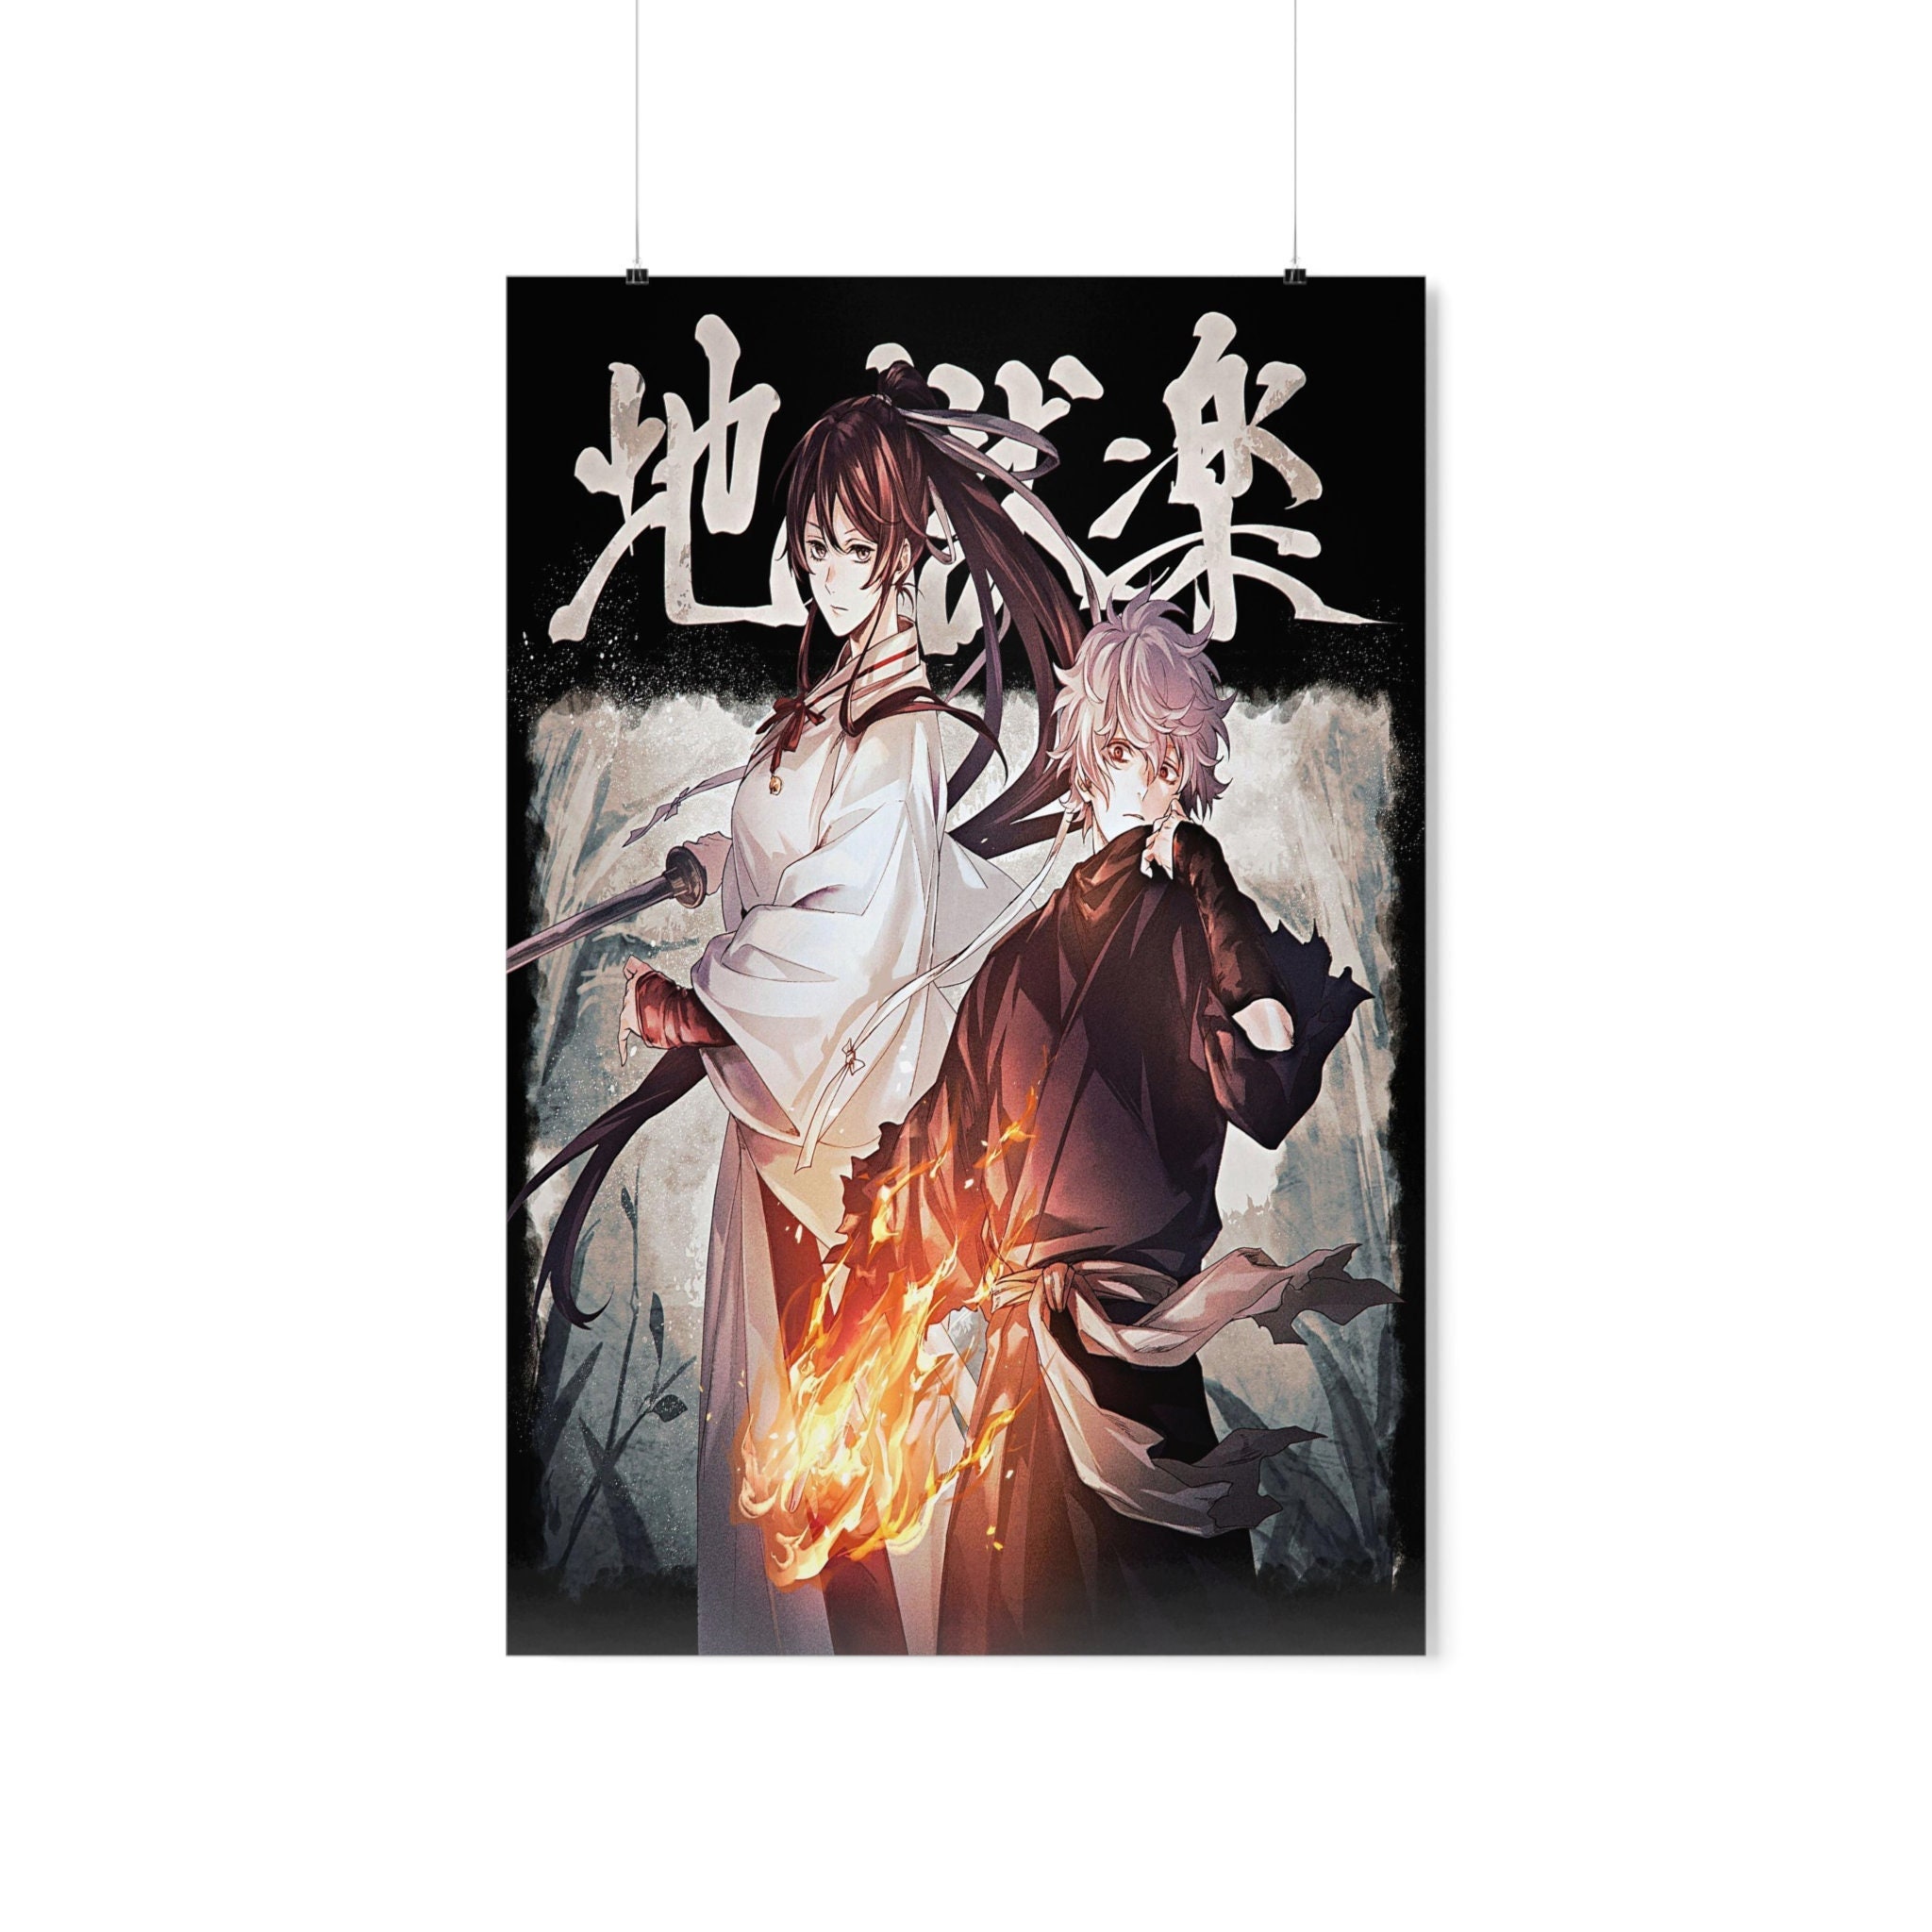  GUNKY Hell's Paradise Jigokuraku Anime Posters Poster Cool  Artworks Painting Wall Art Canvas Prints Hanging Picture Home Decor Posters  Gift Idea 16x24inch(40x60cm): Posters & Prints